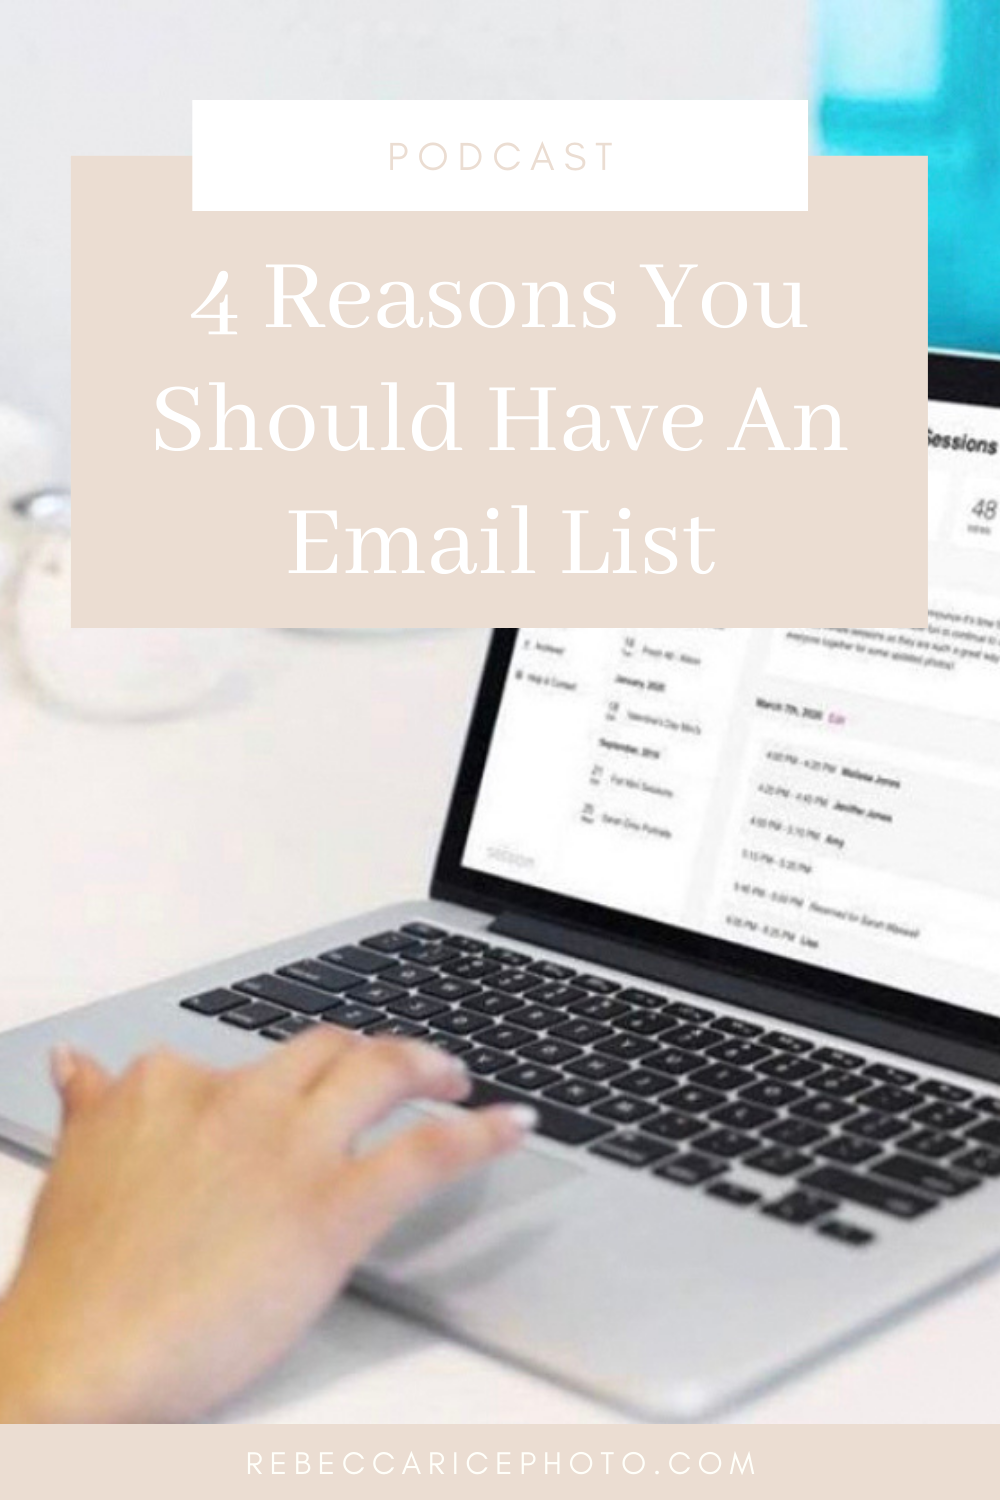 4 reasons you should have an email list as a small business owner